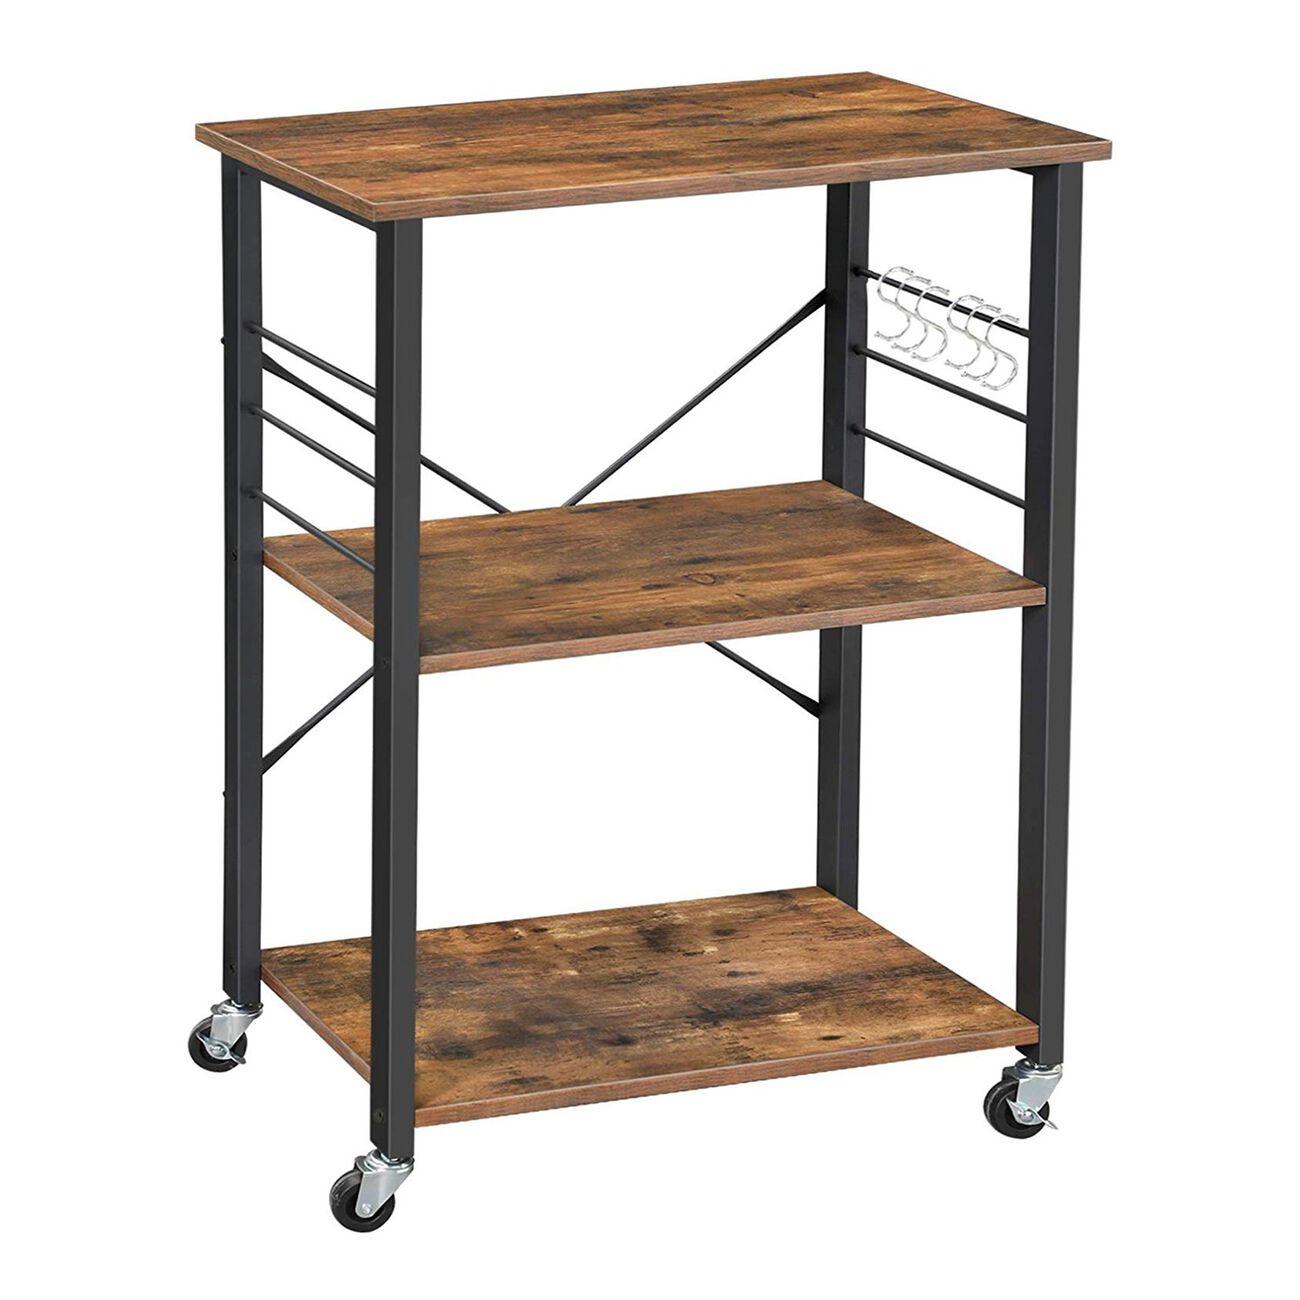 3 Tier Wood and Metal Kitchen Cart with Casters, Rustic Brown and Black